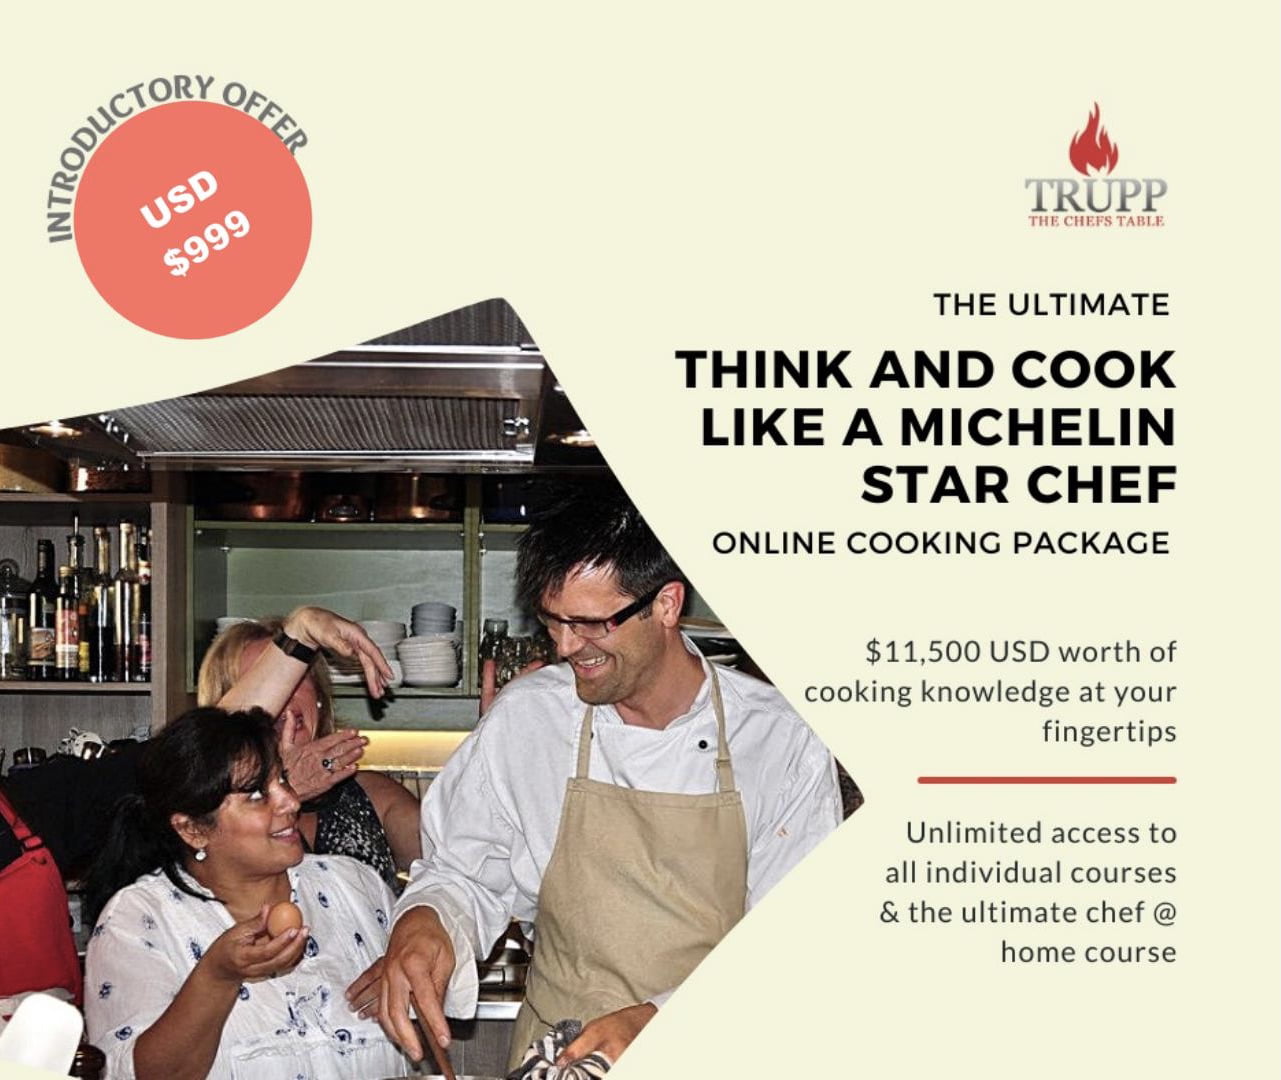 Trupp- The Chefs Table Cooking Experience